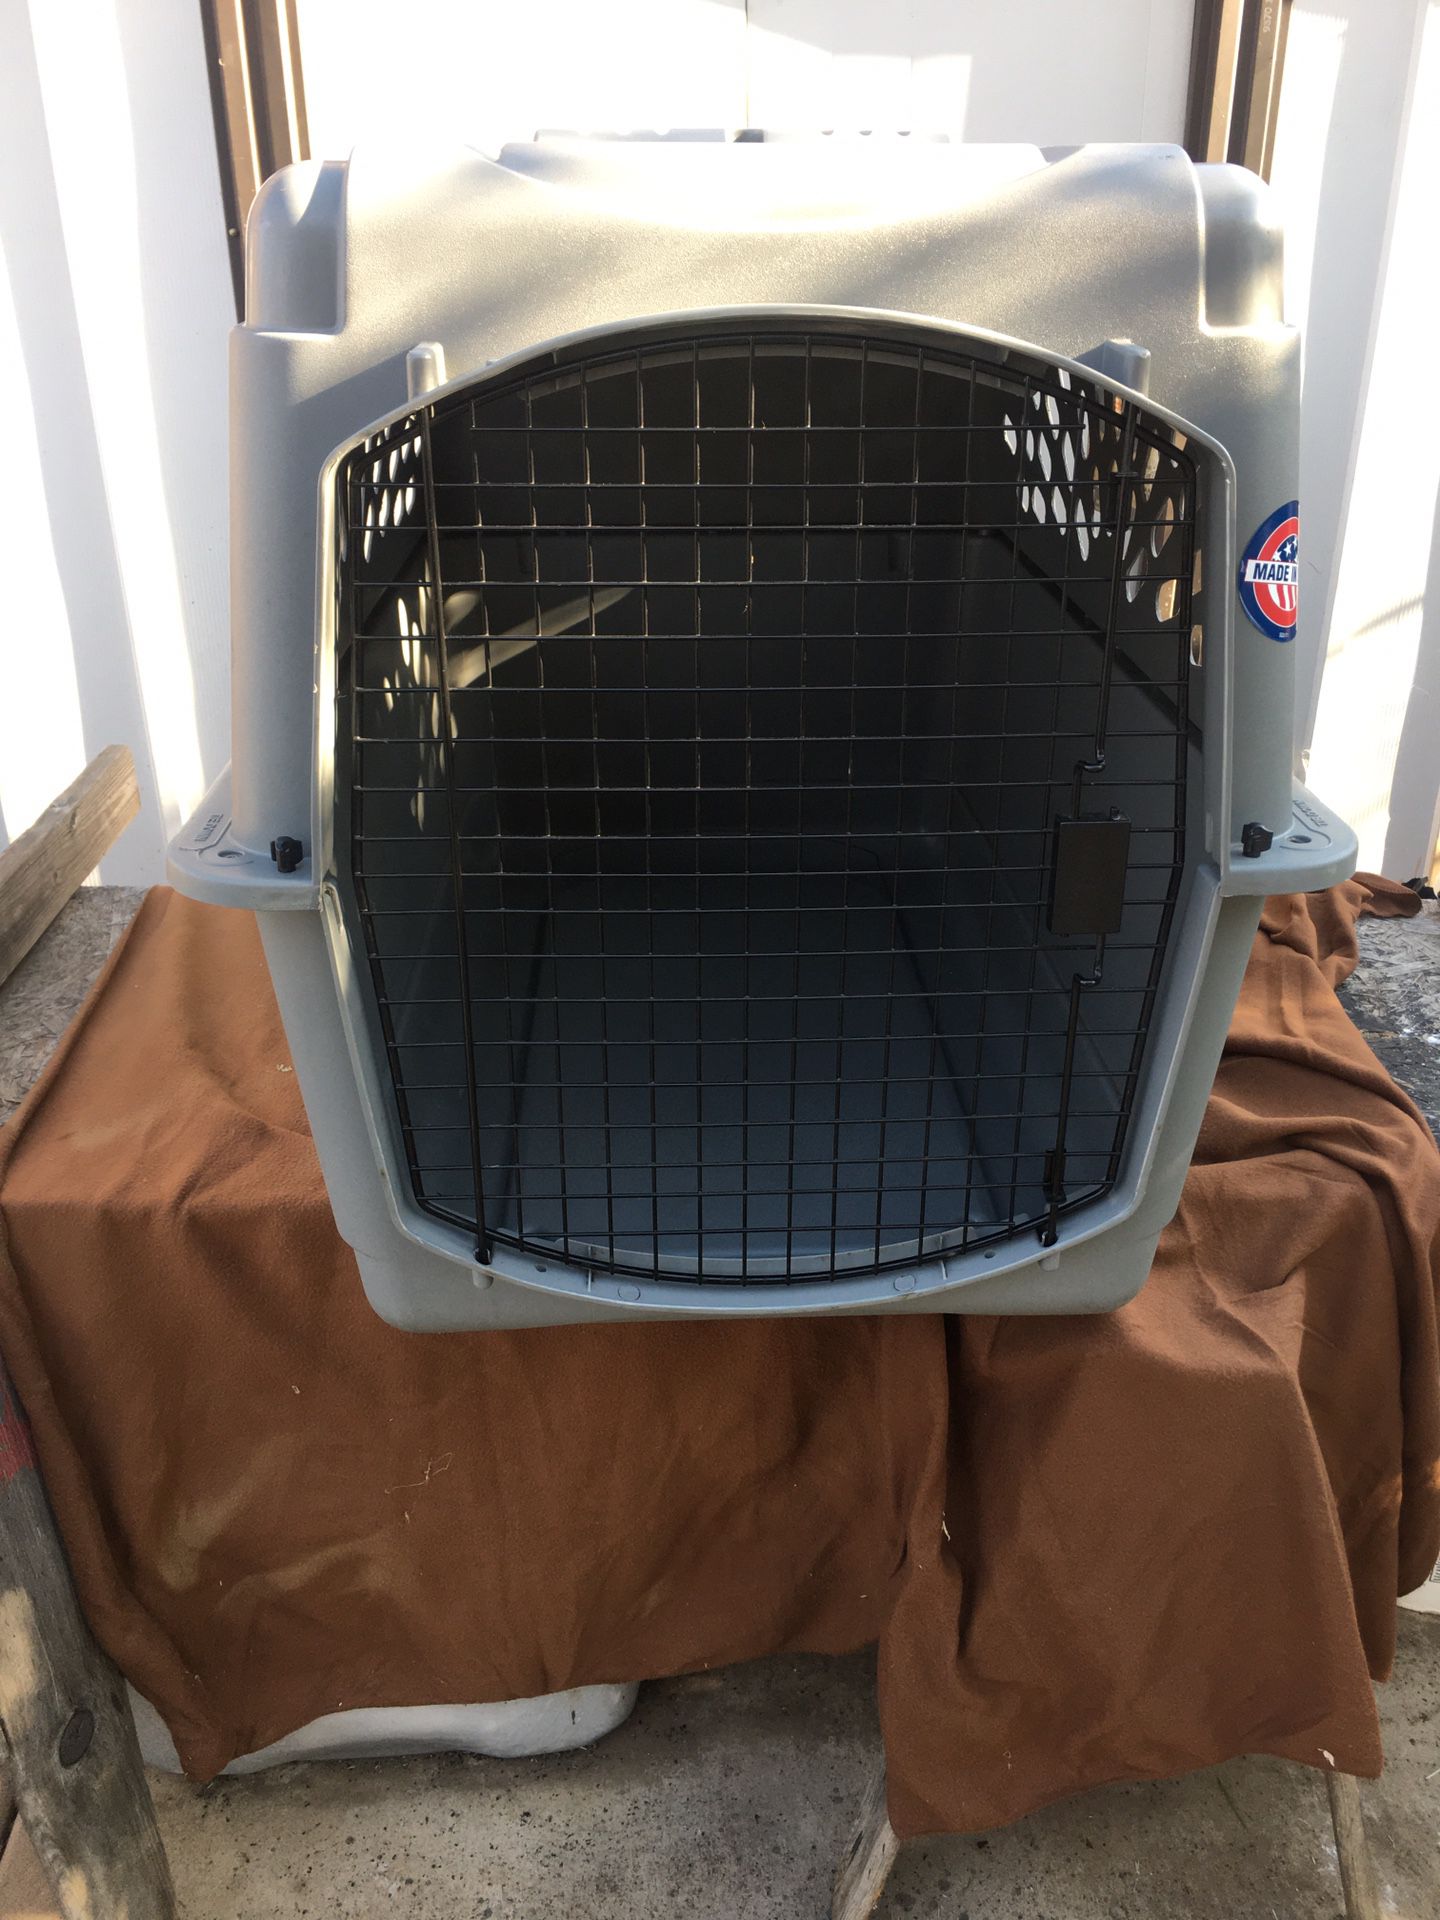 Dog Kennel For Large Dog For Sale 75:00 Dollars  Firm Price Great Condition , Price Of New One More Than 200:00  Dollars  , And This Is In Great Condi